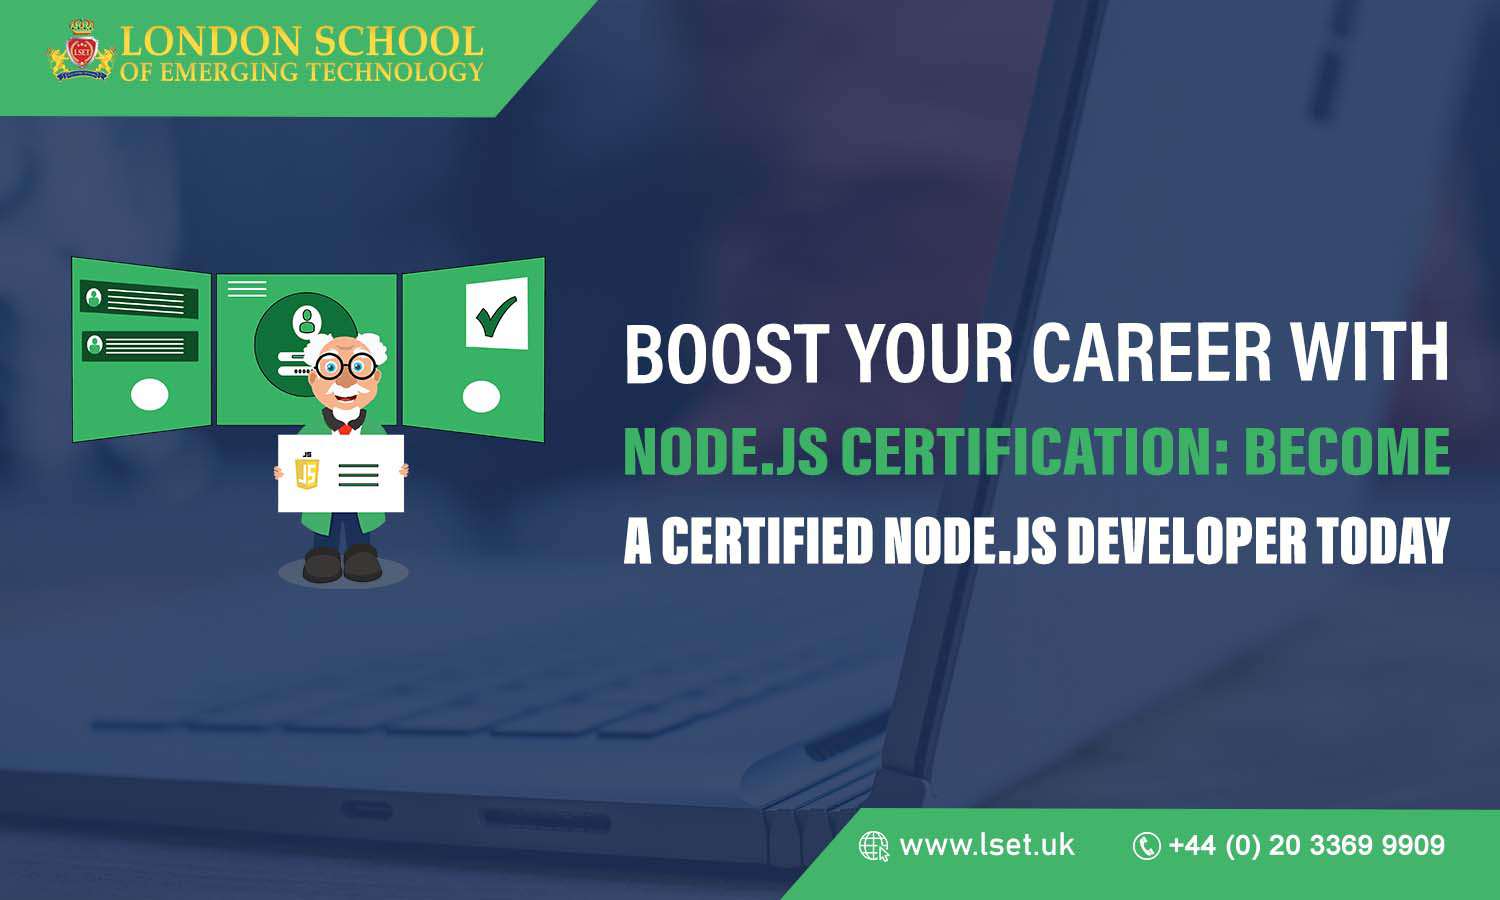 Boost Your Career with Node.js Certification Become a Certified Node.js Developer Today